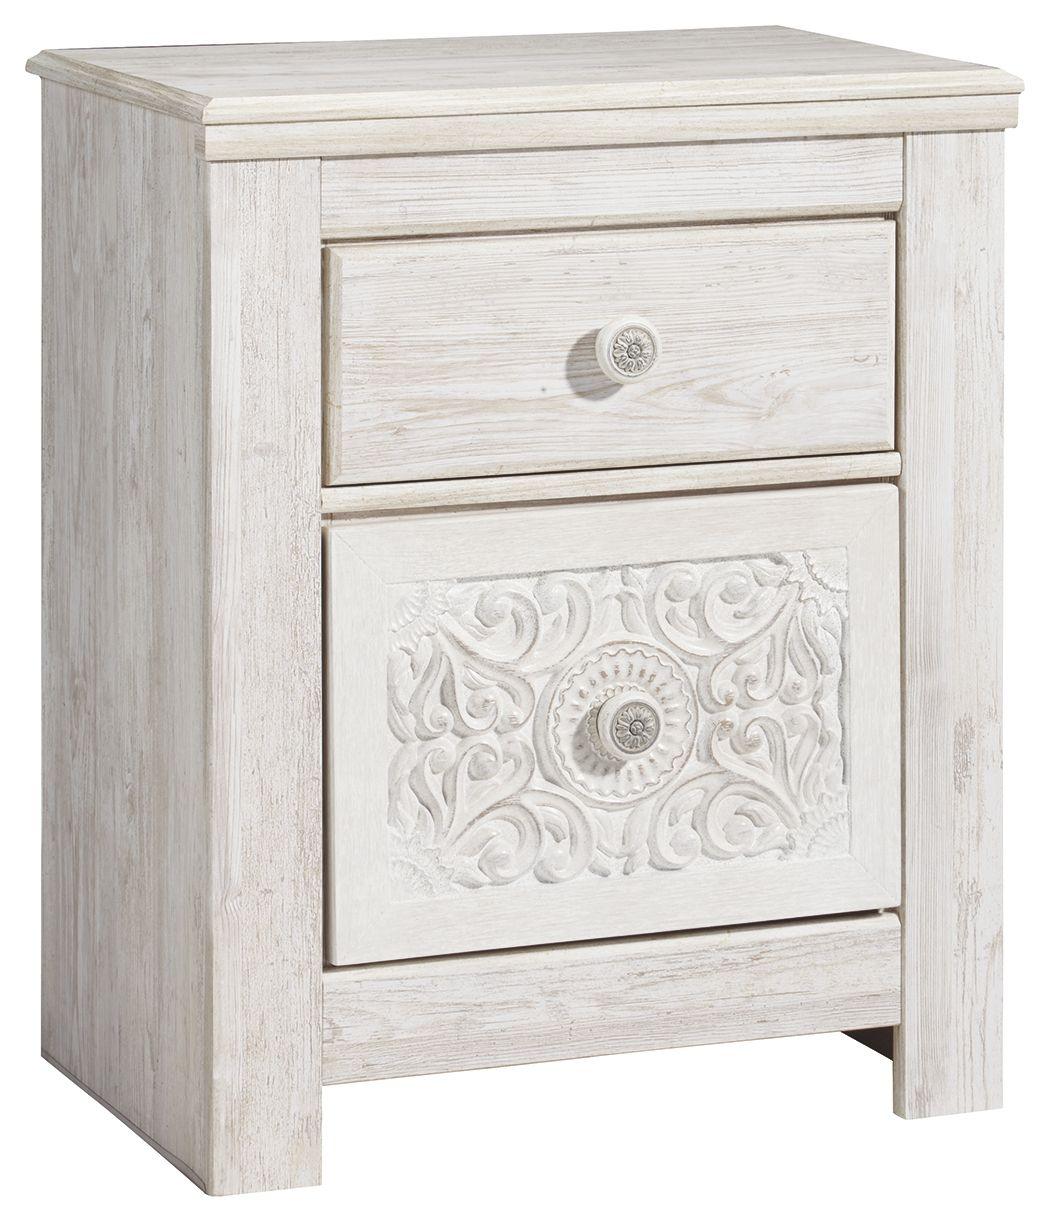 Ashley Furniture - Paxberry - Whitewash - Two Drawer Night Stand - 5th Avenue Furniture